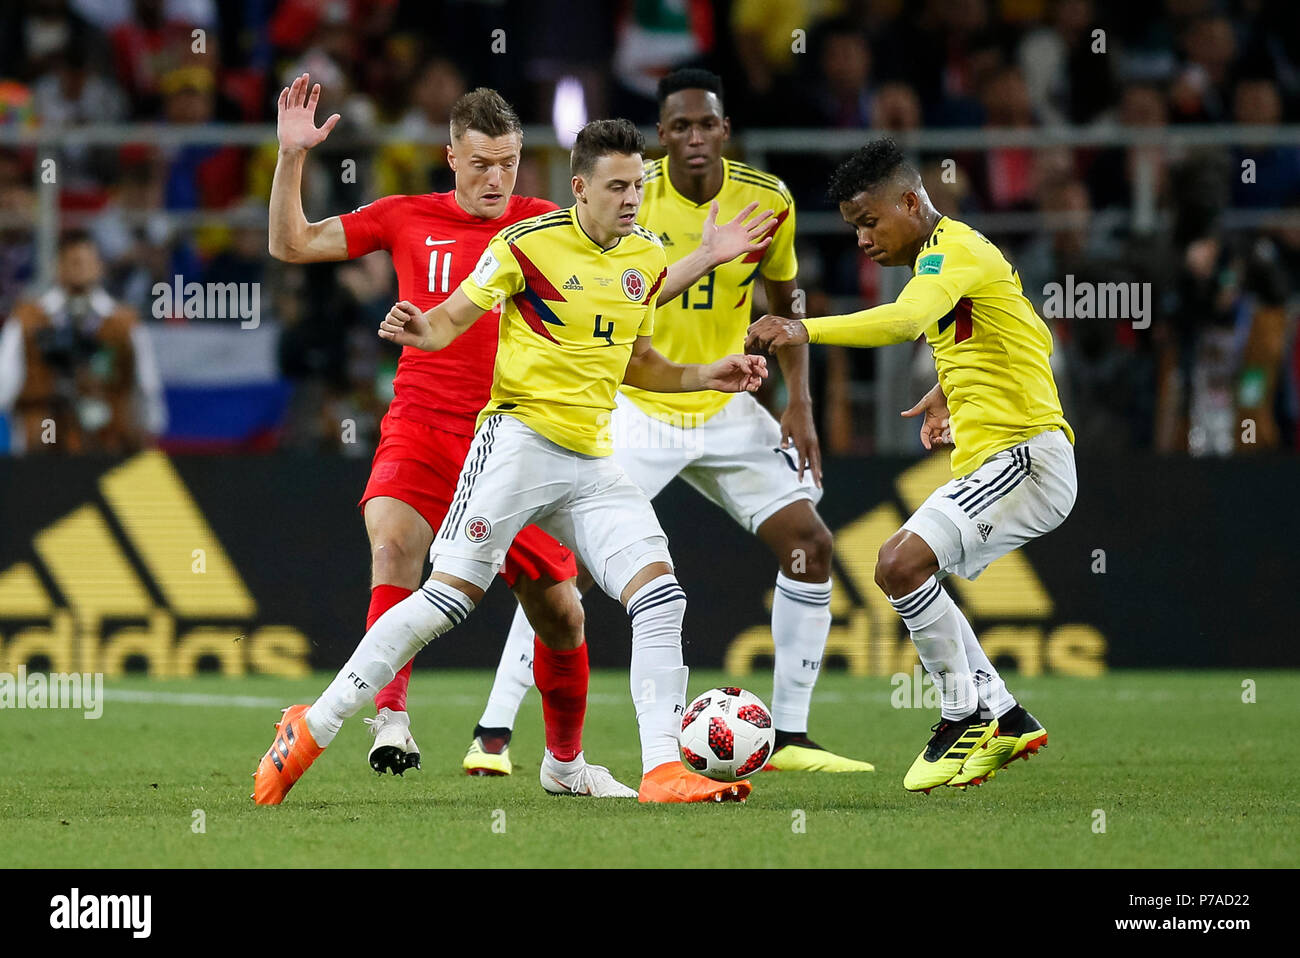 Moscow, Russia. 3rd July, 2018. Jamie Vardy of England, Santiago Arias of Colombia, Yerry Mina of Colombia and Wilmar Barrios of Colombia during the 2018 FIFA World Cup Round of 16 match between Colombia and England at Spartak Stadium on July 3rd 2018 in Moscow, Russia. (Photo by Daniel Chesterton/phcimages.com) Credit: PHC Images/Alamy Live News Stock Photo